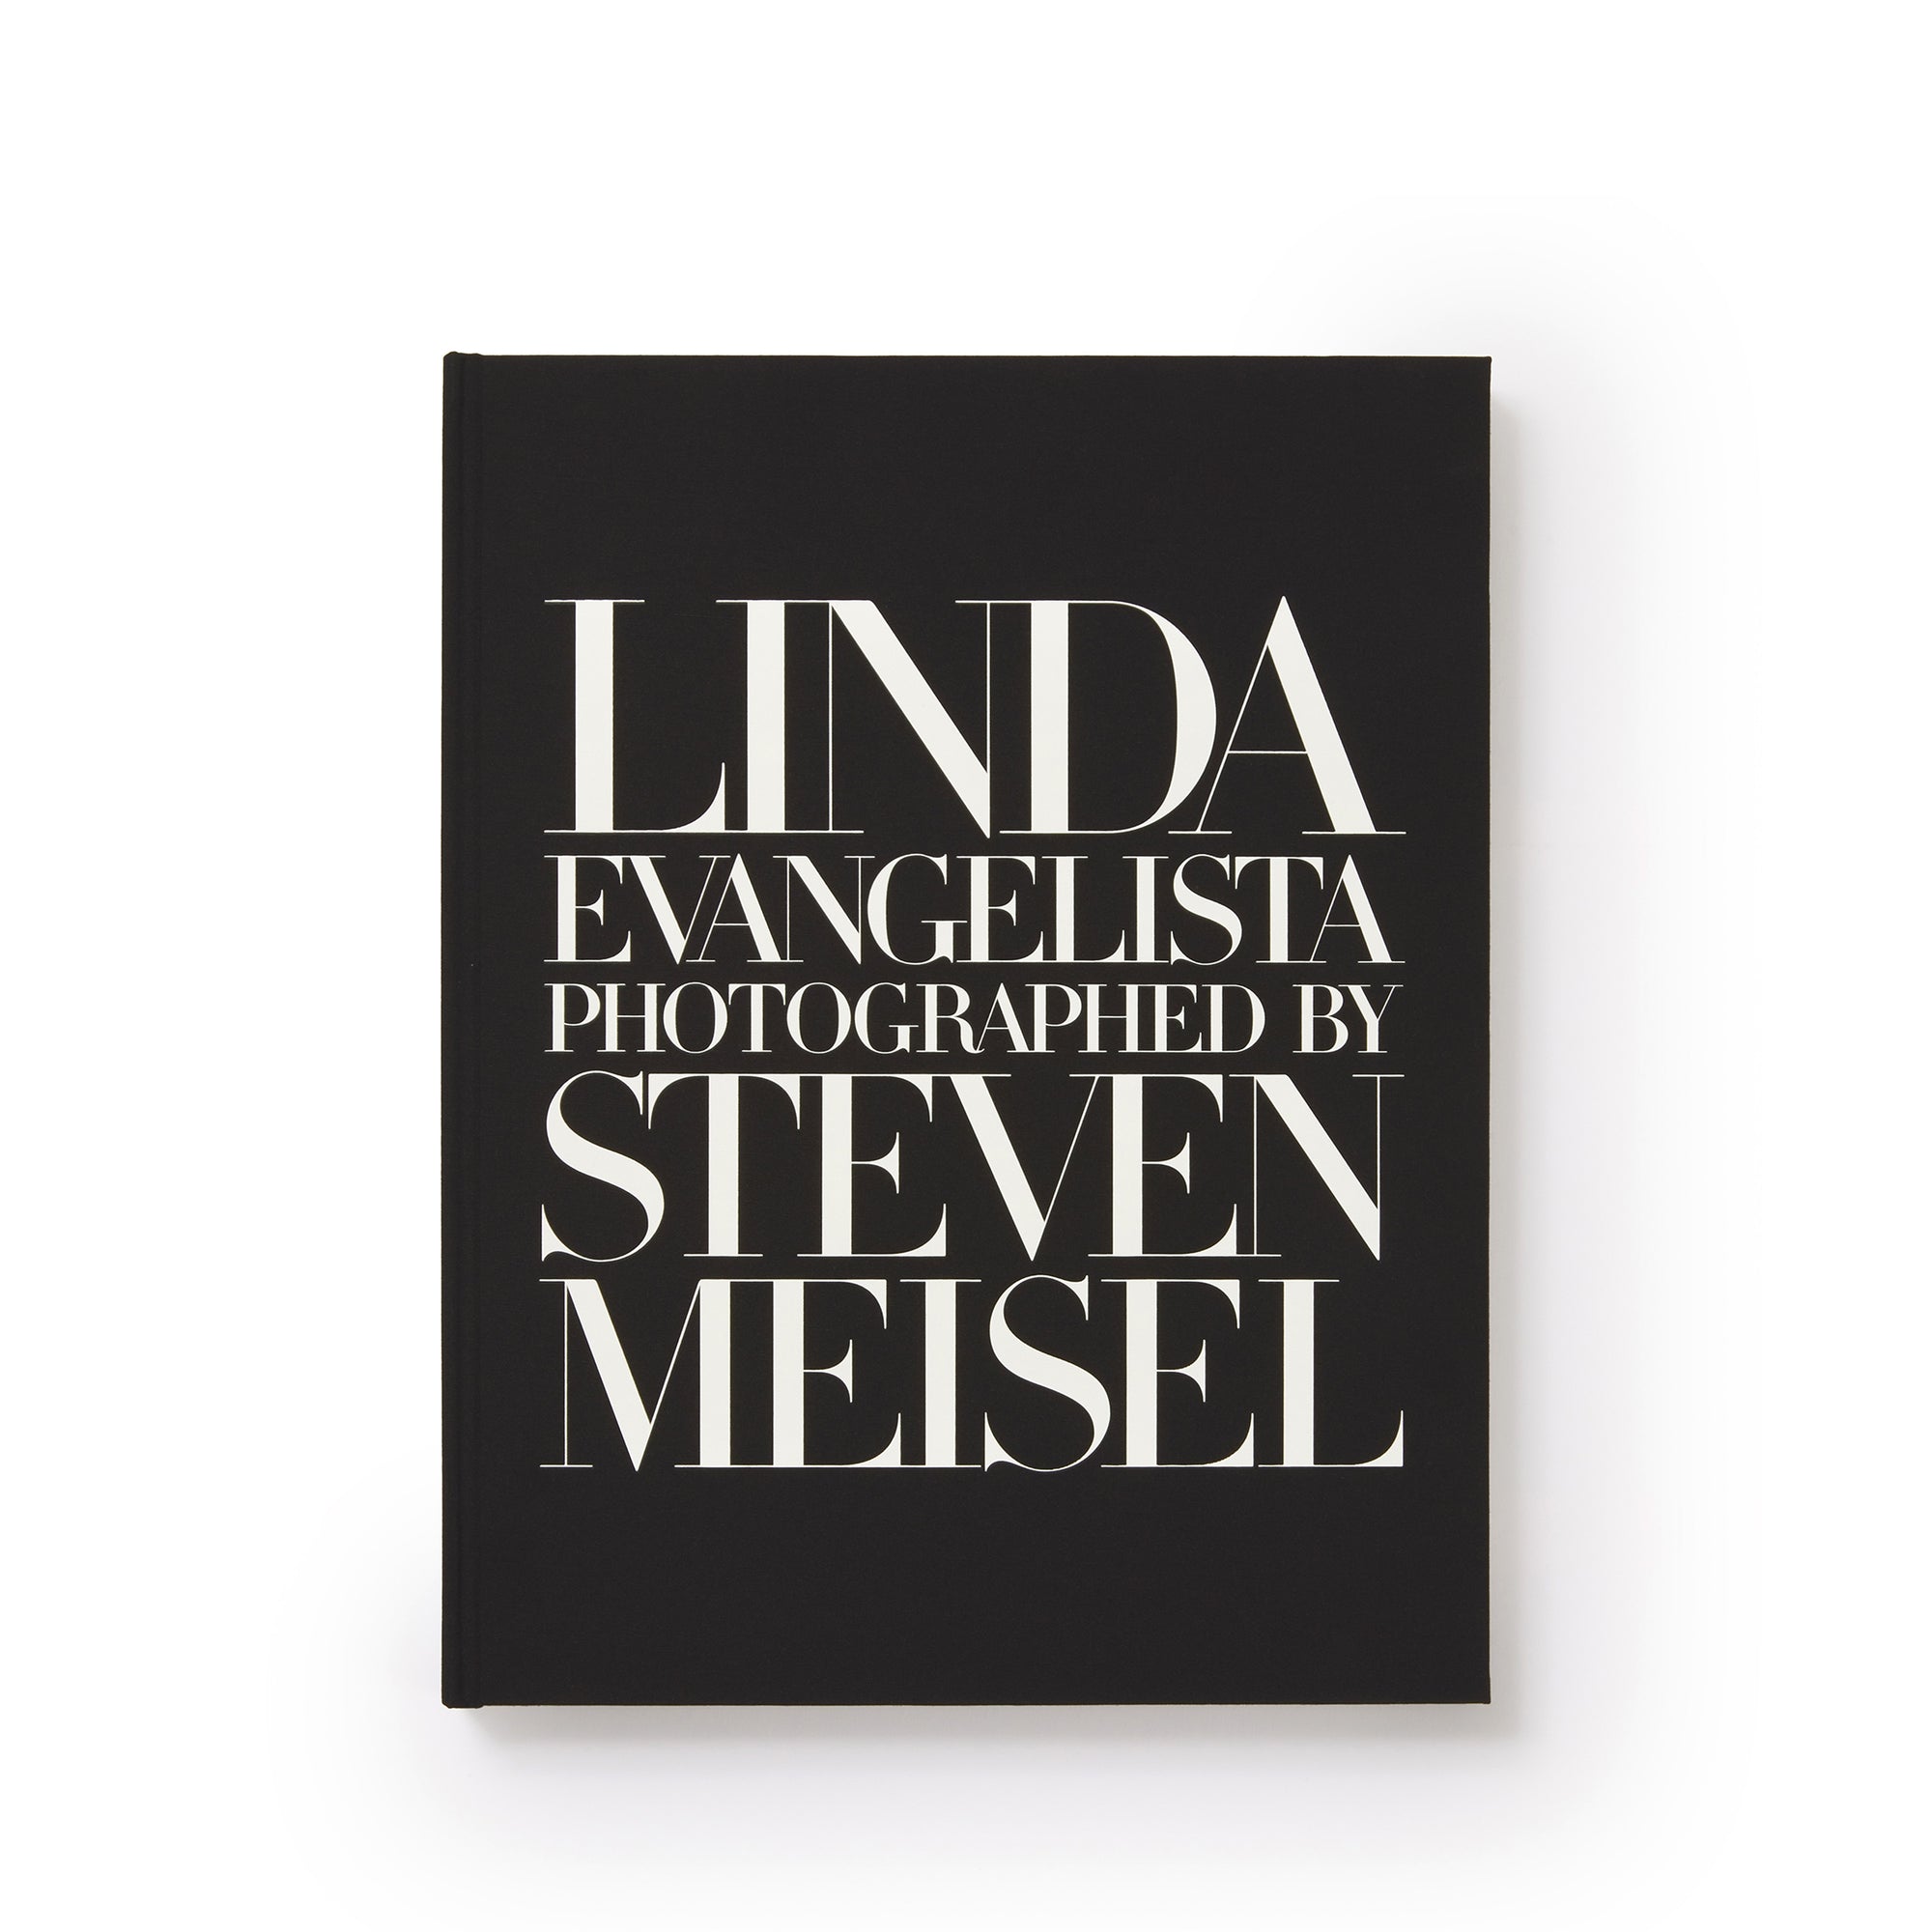 Phaidon - Signed Linda Evangelista Photographed By Steven Meisel - (Black) view 1